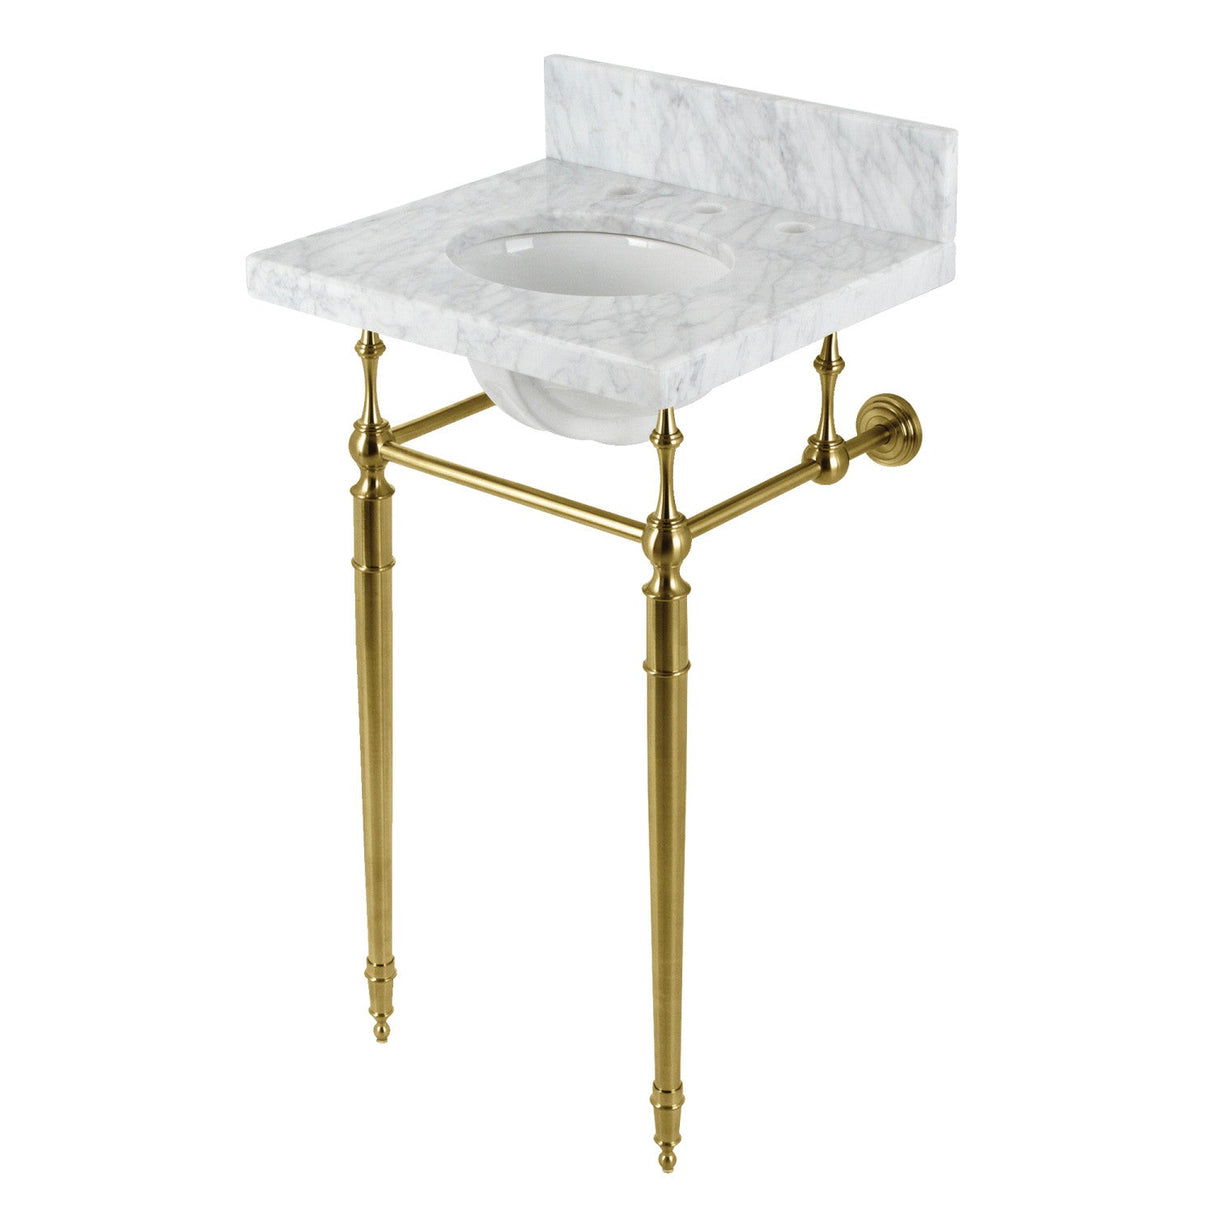 Fauceture KVPB1917M387ST 19-Inch Carrara Marble Console Sink with Brass Legs (8" Faucet Drillings), Marble White/Brushed Brass